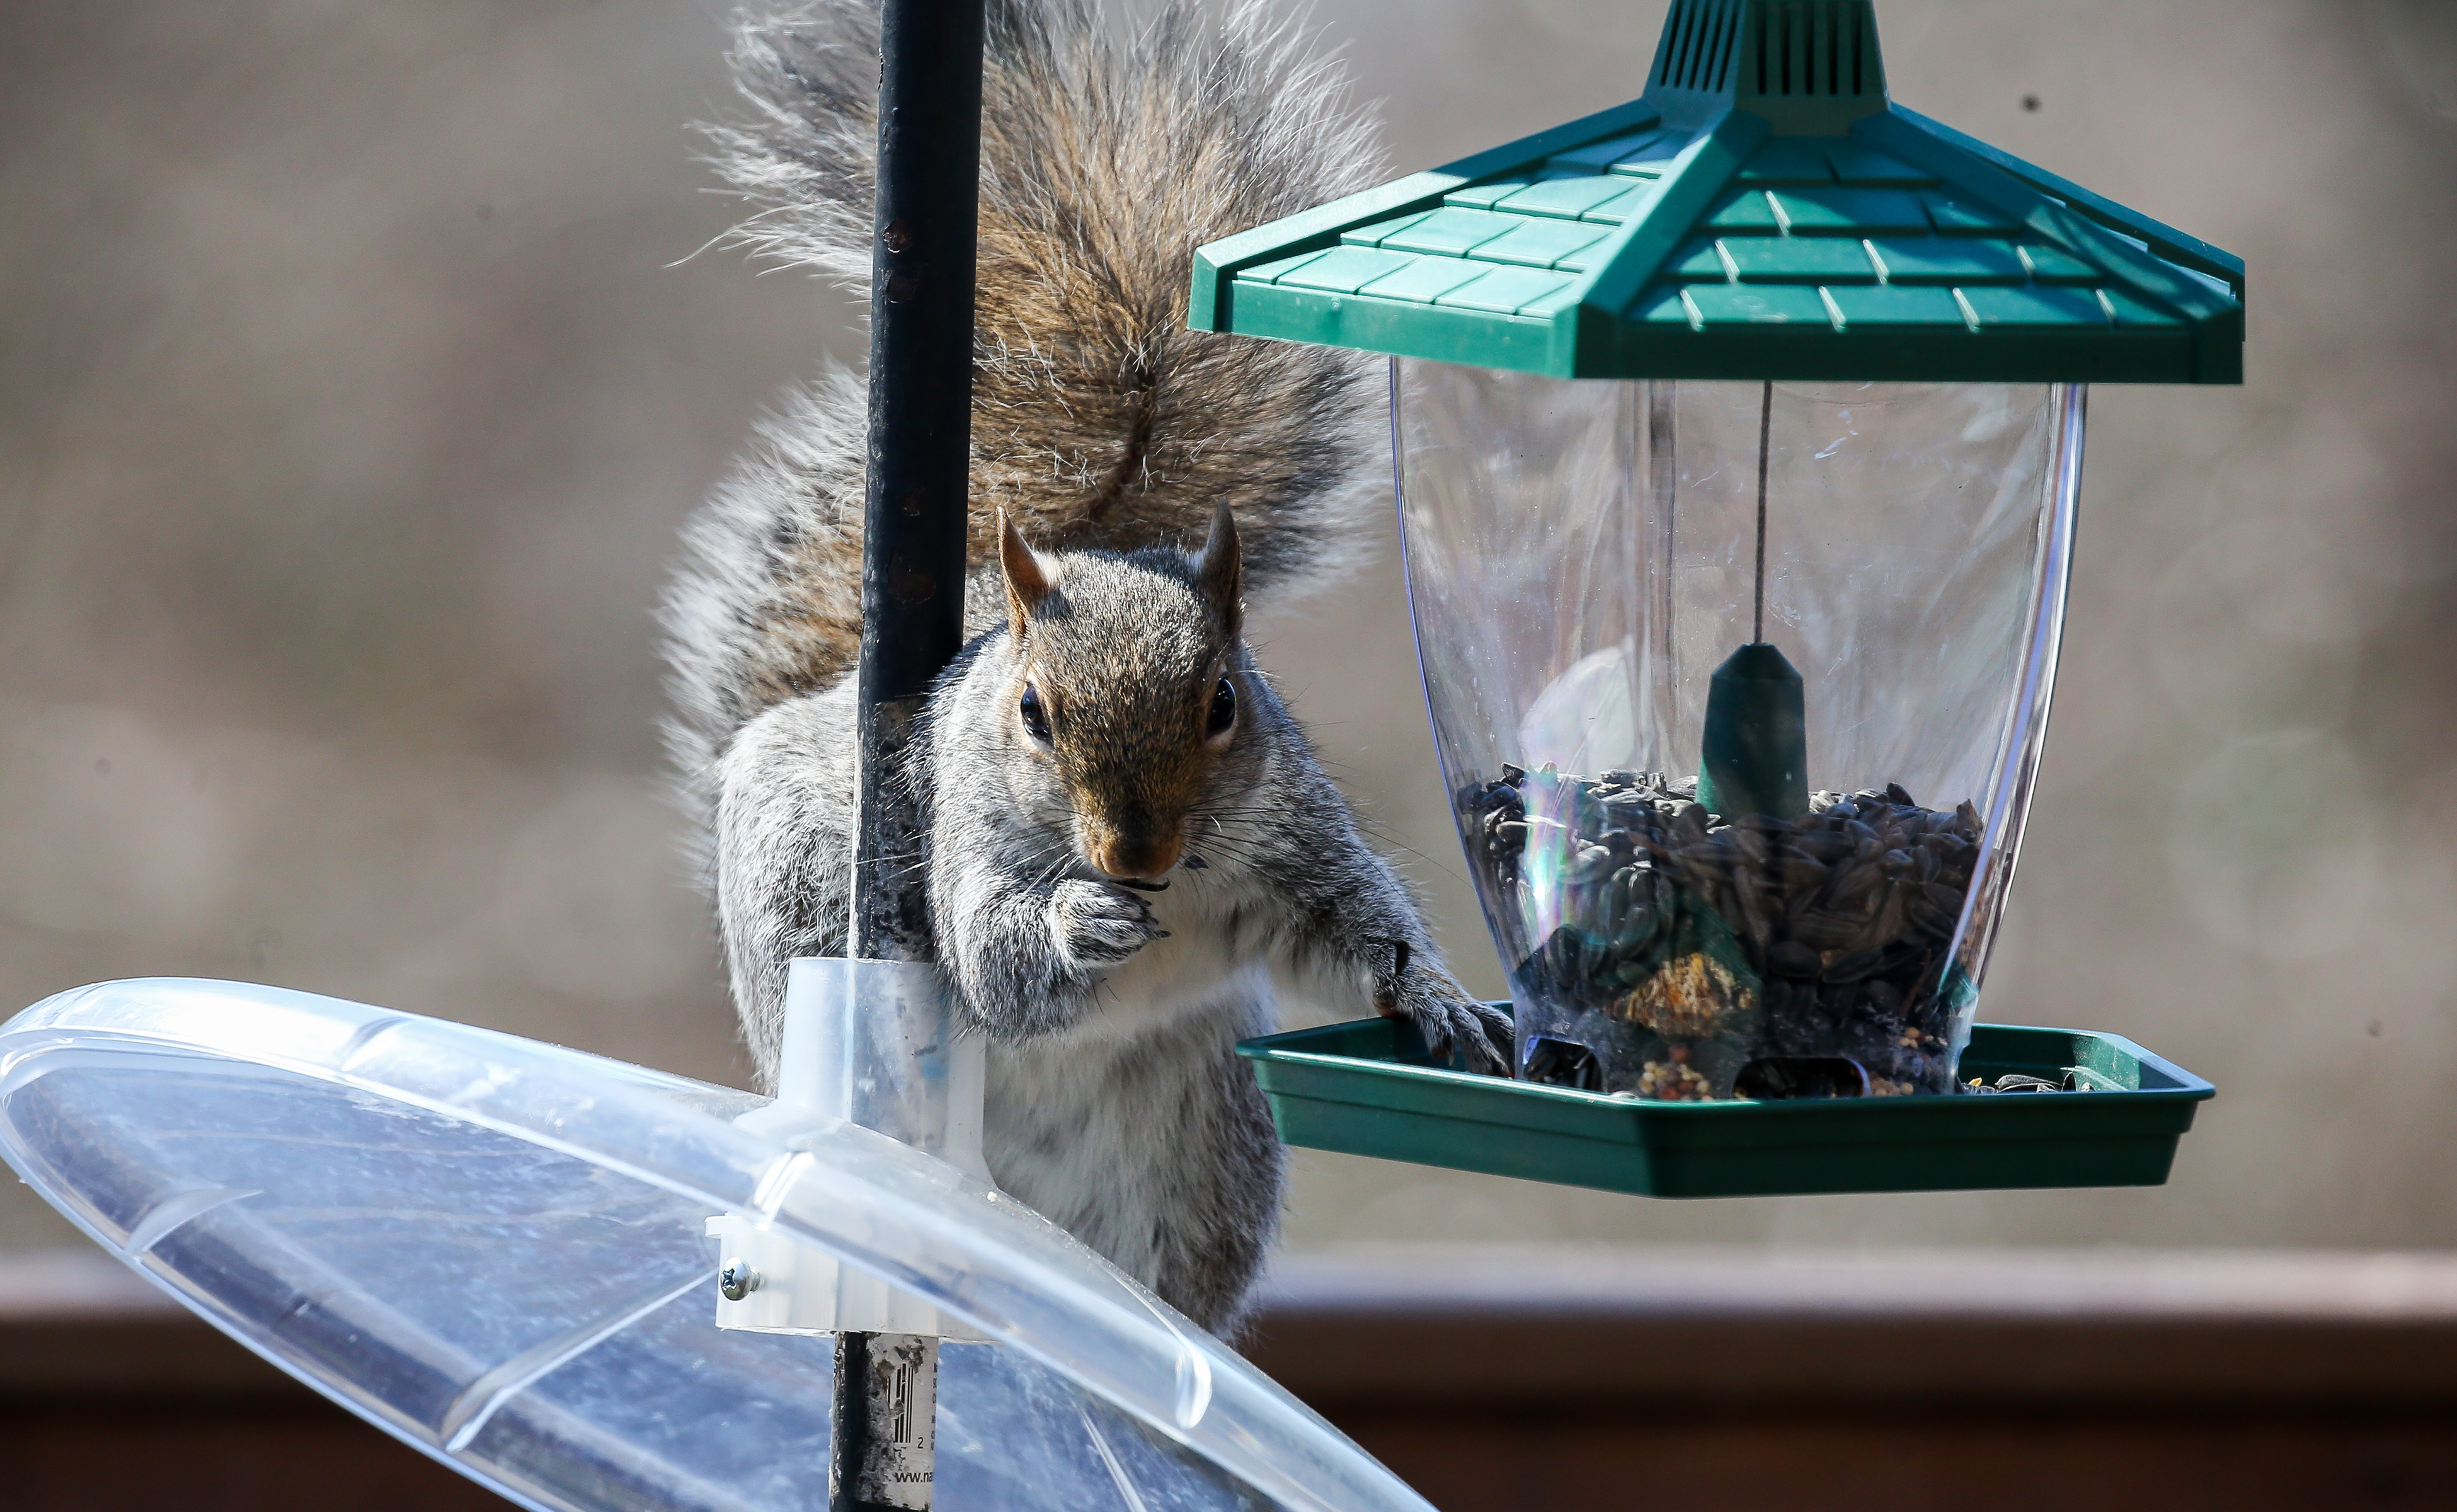 A grey squirrel eating seeds from a squirrel-proof bird feeder